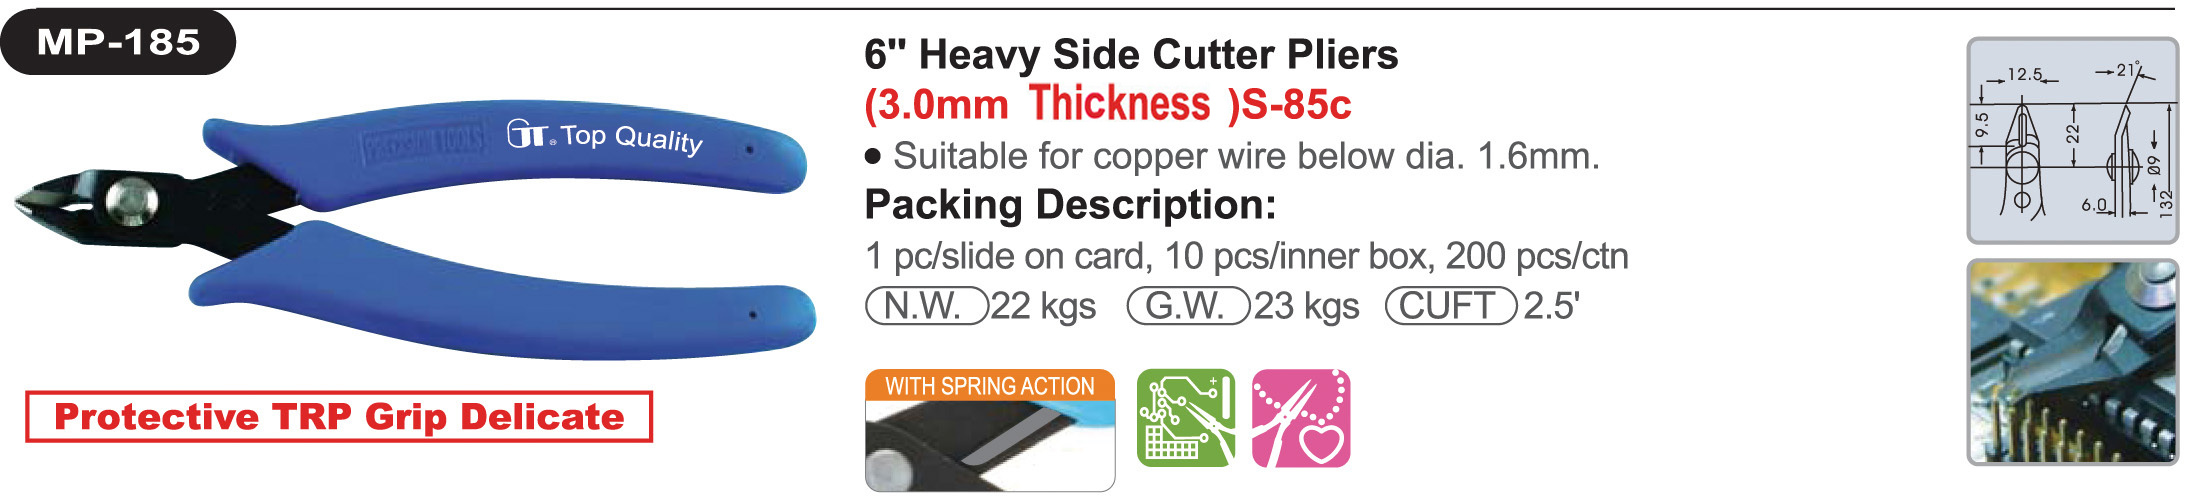 proimages/product/pliers/cutting_pliers/Diagonal_Cutters/MP-185/MP-185_00.jpg